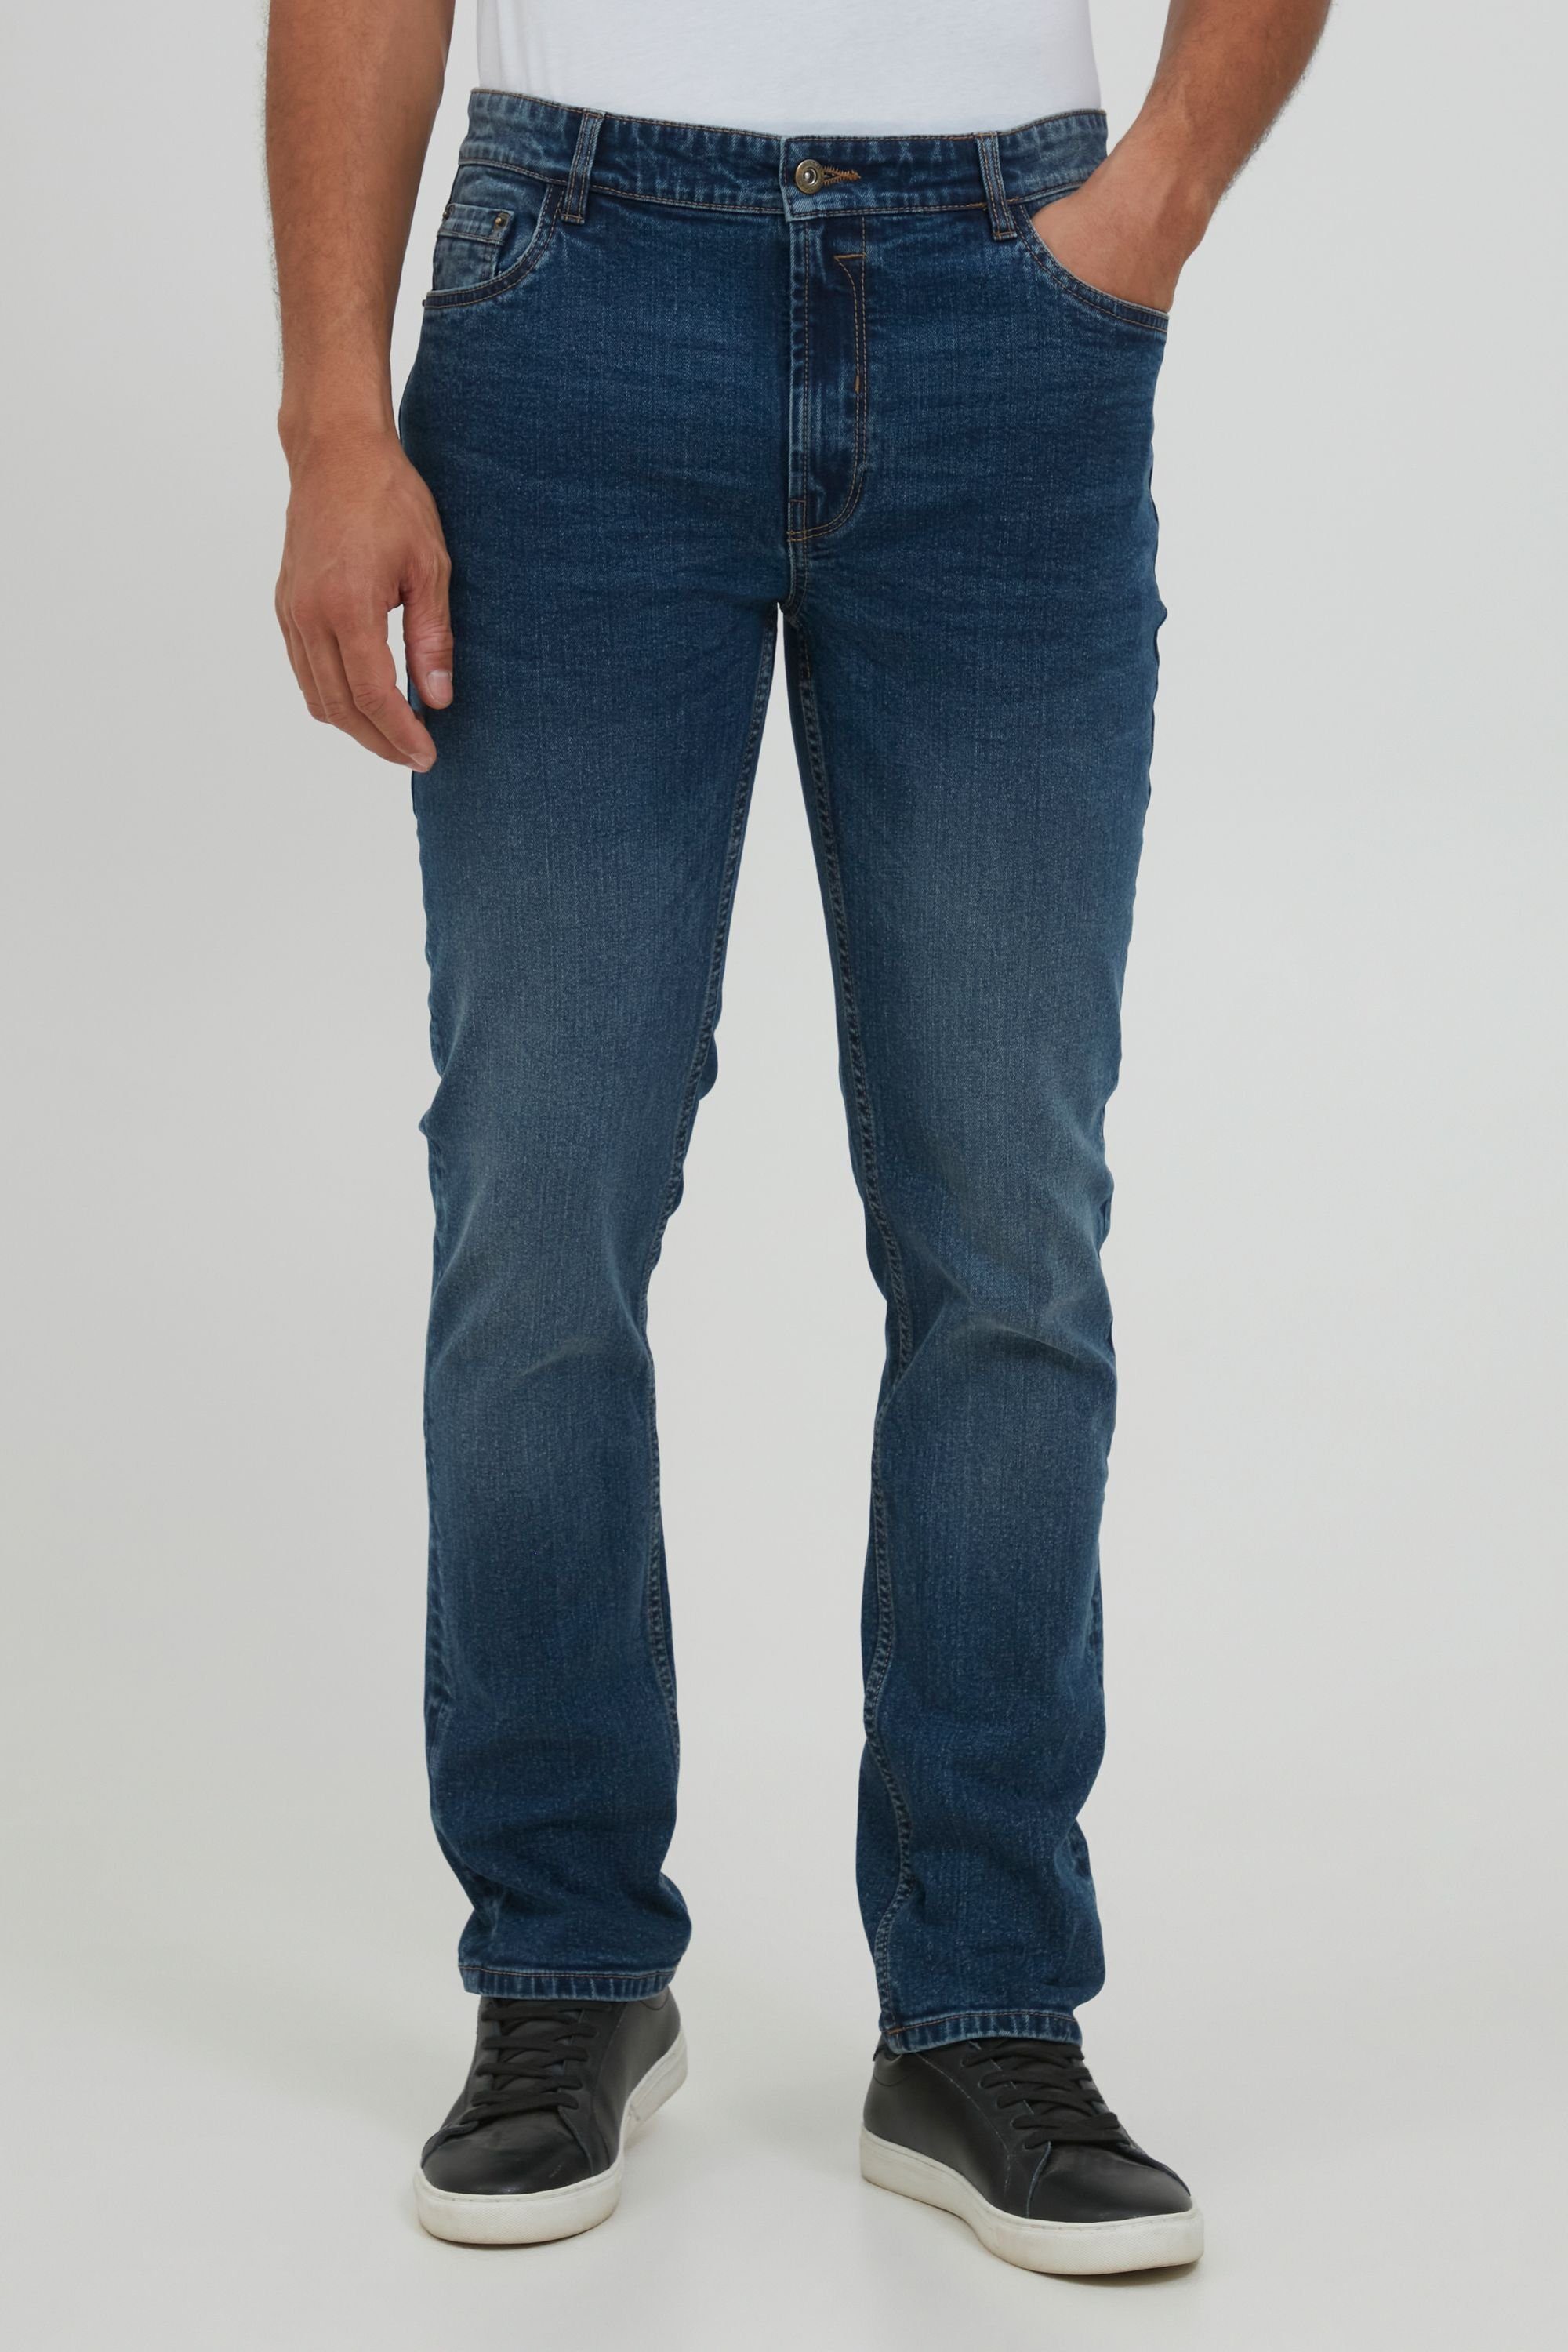 Project 5-Pocket-Jeans PRBettino 11 Blue Middle Denim 11 Project